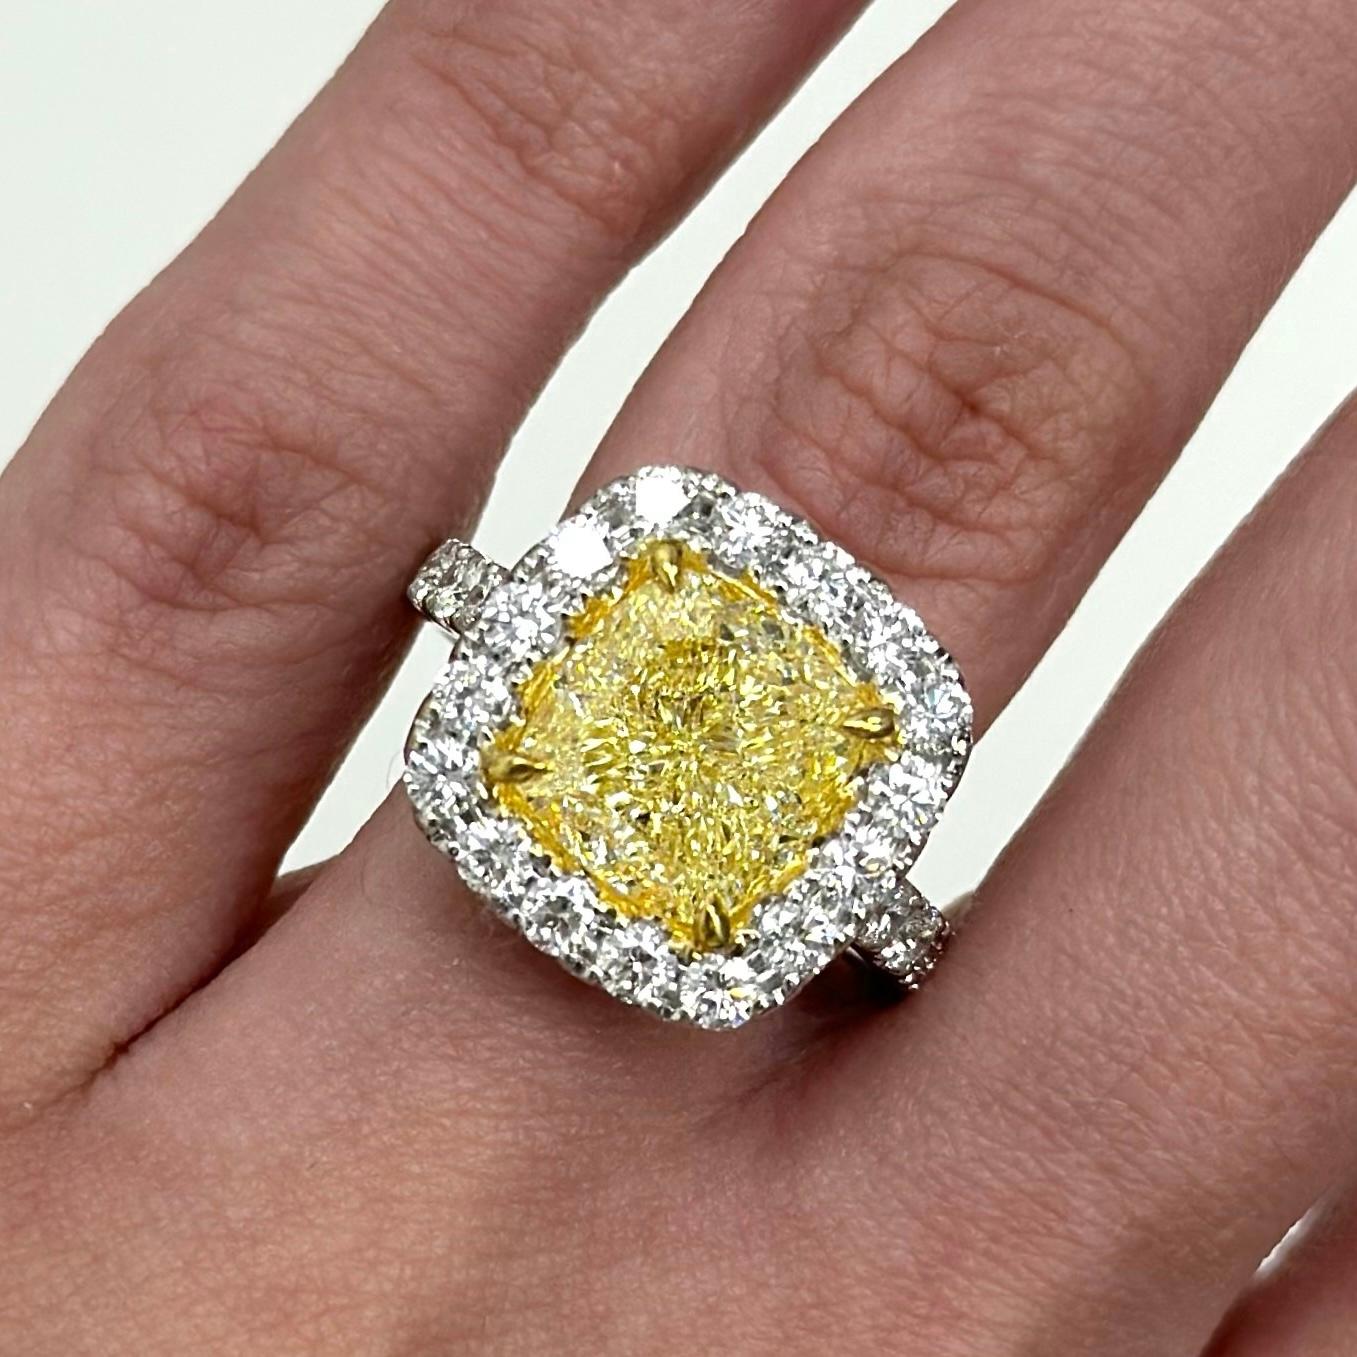 Stunning modern GIA certified fancy intense yellow diamond with diamond halo ring, two-tone 18k white and yellow gold. 
High jewelry by Alexander Beverly Hills.
6.56 carats total diamond weight.
5.03 carat cushion Fancy Intense Yellow color and SI1